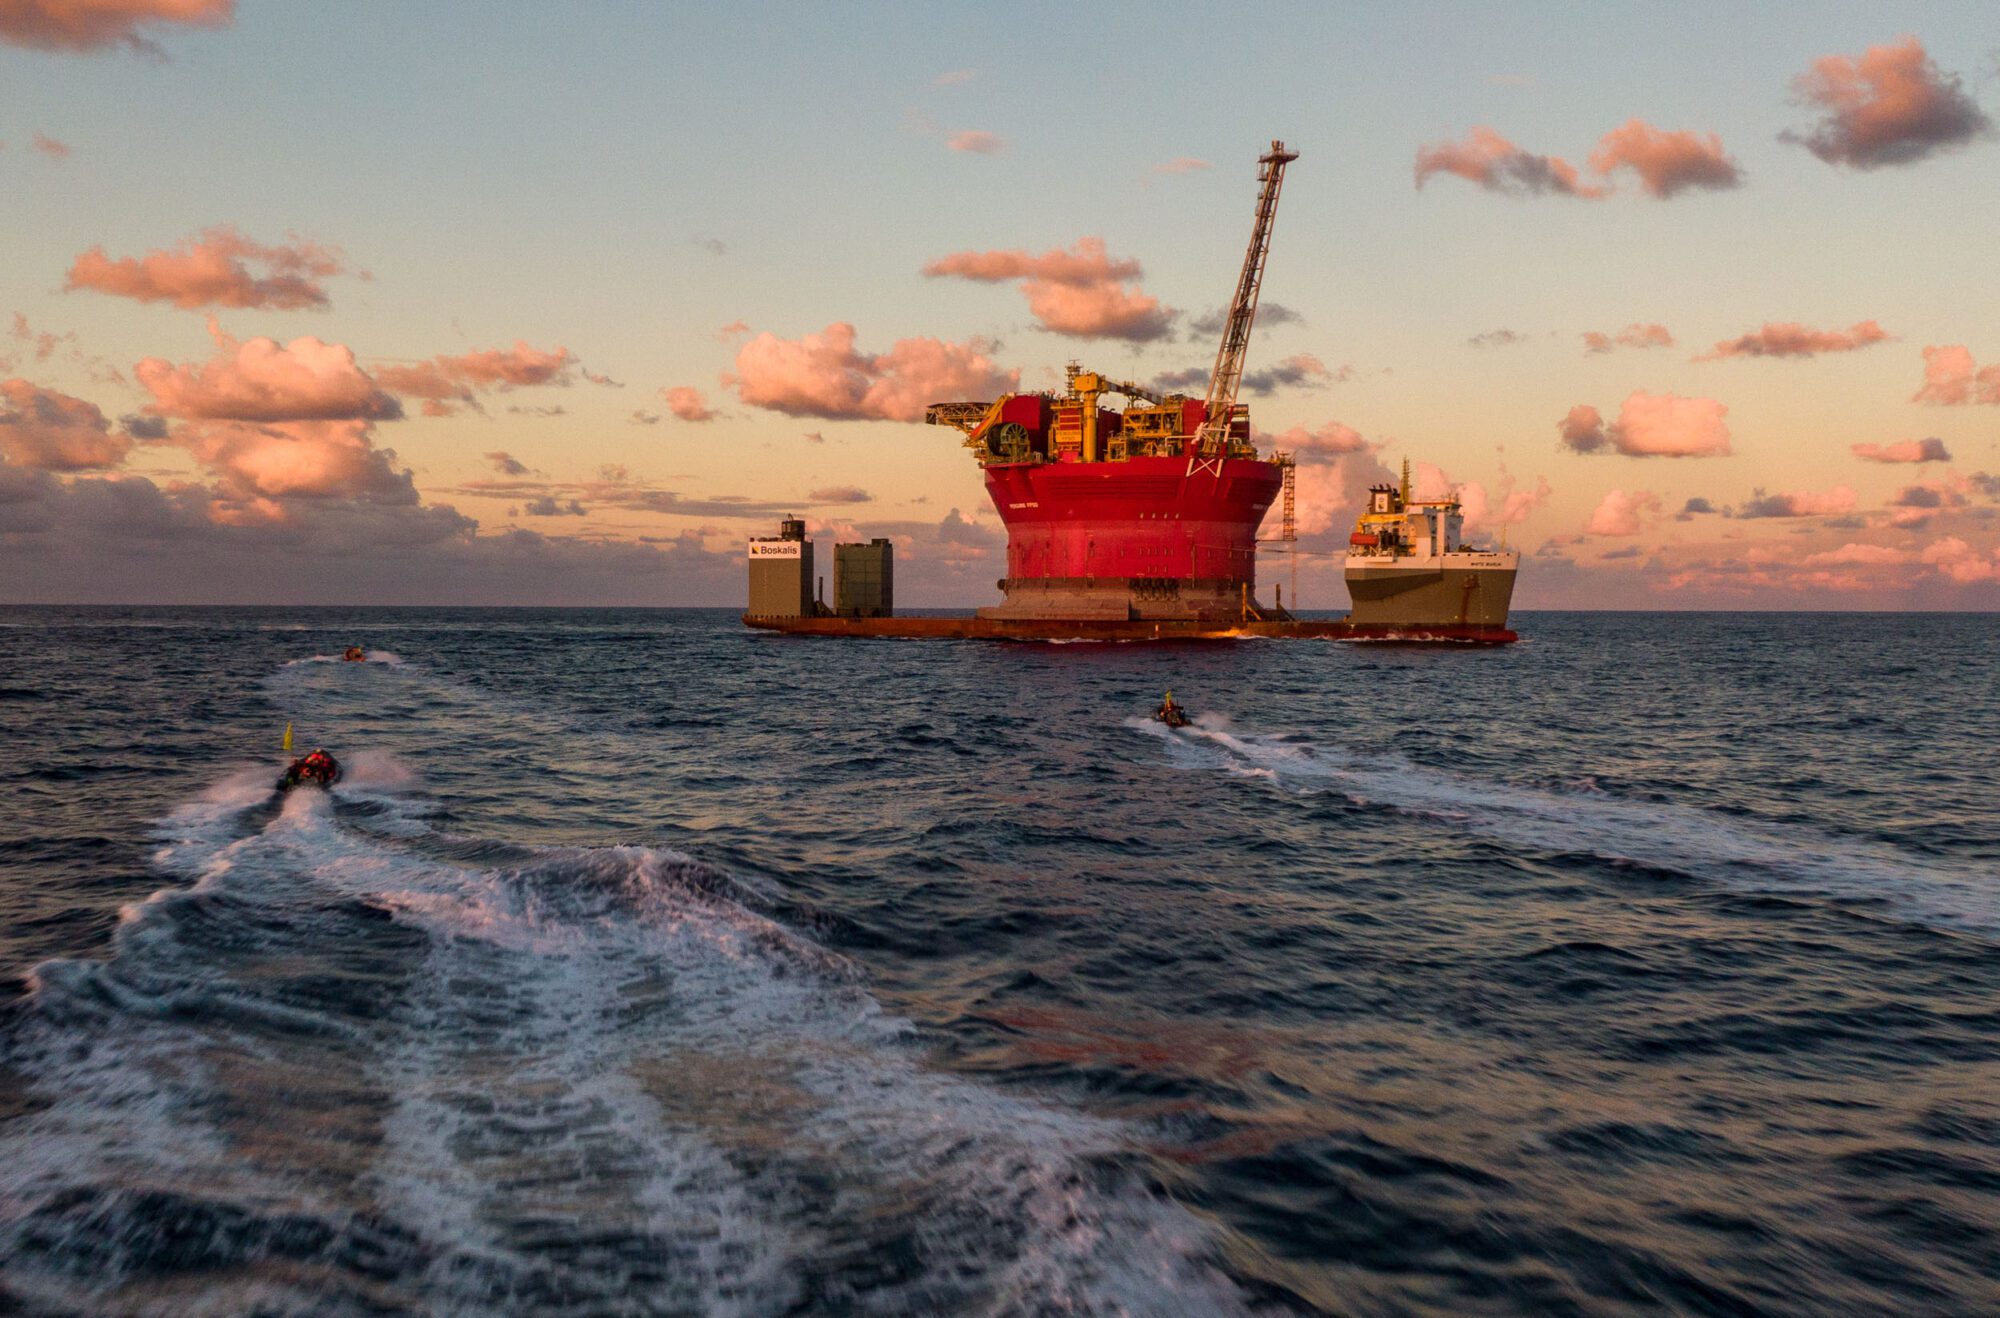 Three tiny rhib boats with white water trailing behind them approach a giant red oil platform with a large crane rising up to double its height, and two additional structures on each side. The platform are sat on the horizon of a still seascape at sunset, with pink clouds framing the structures.